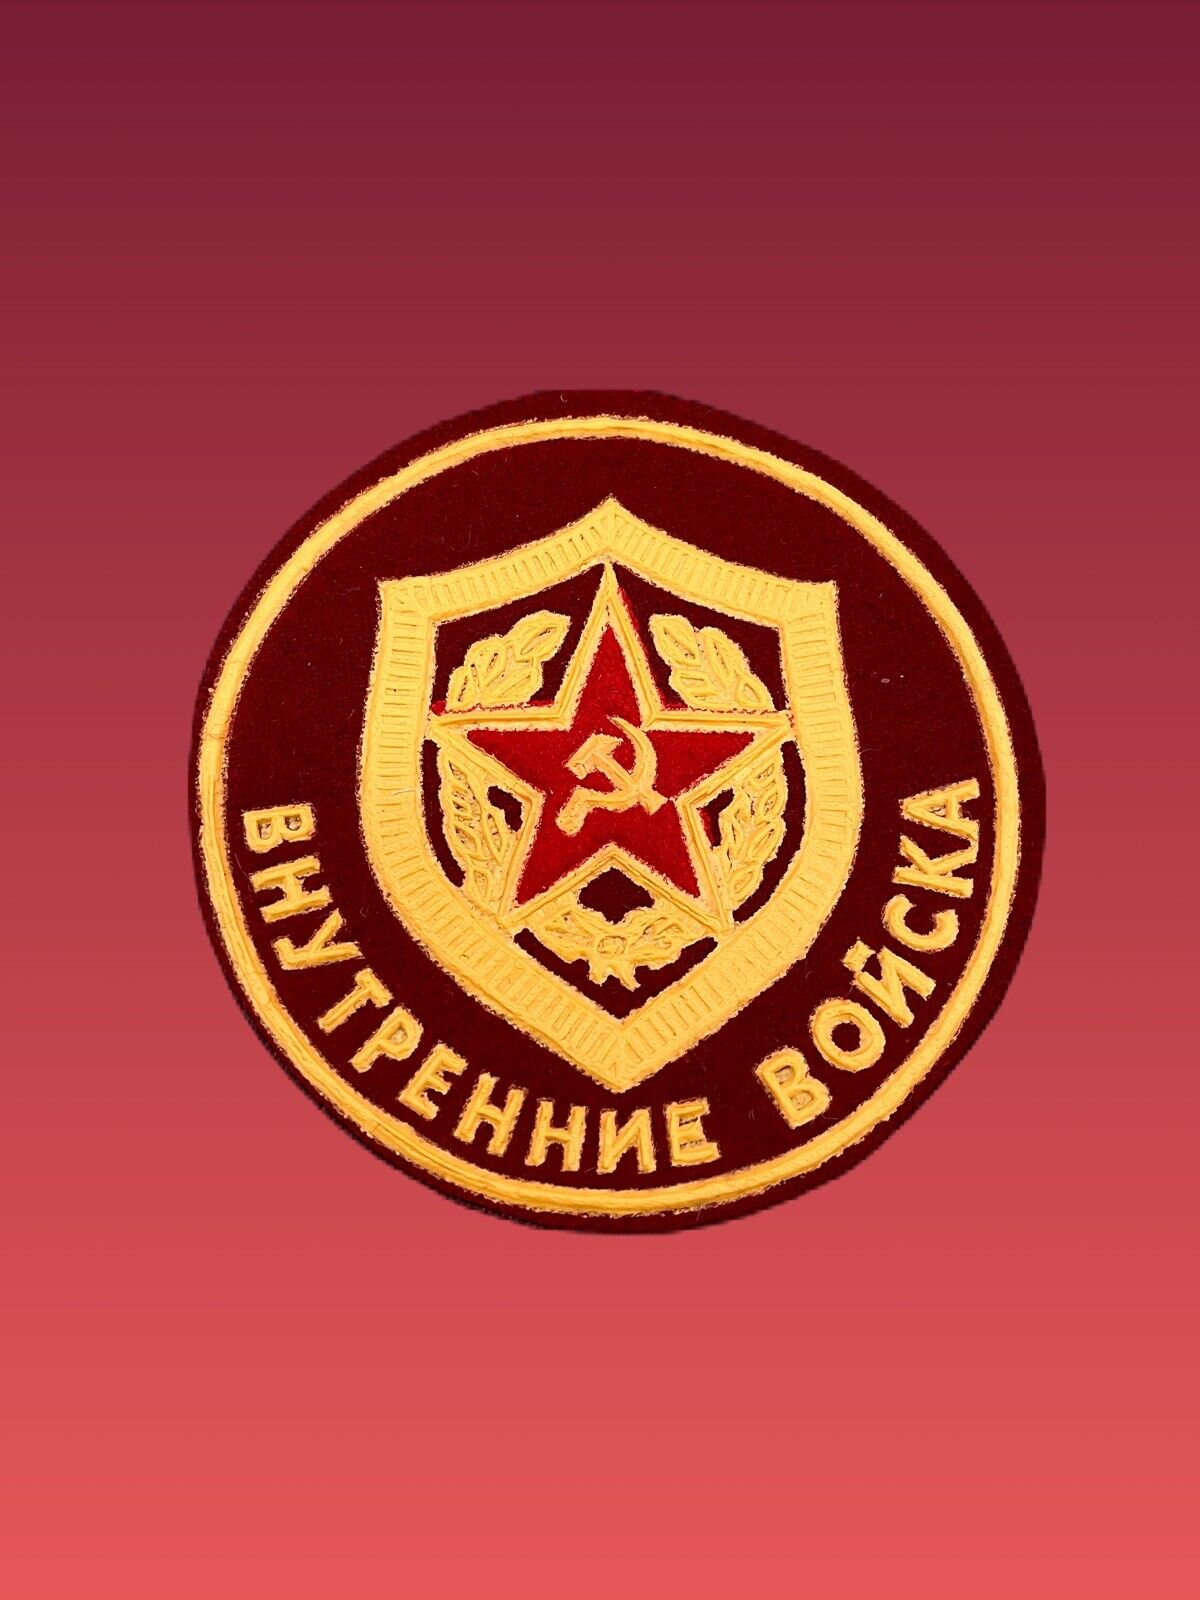 Soviet Russian Sleeve Patch of the Internal Army Troops of the MVD (#8)